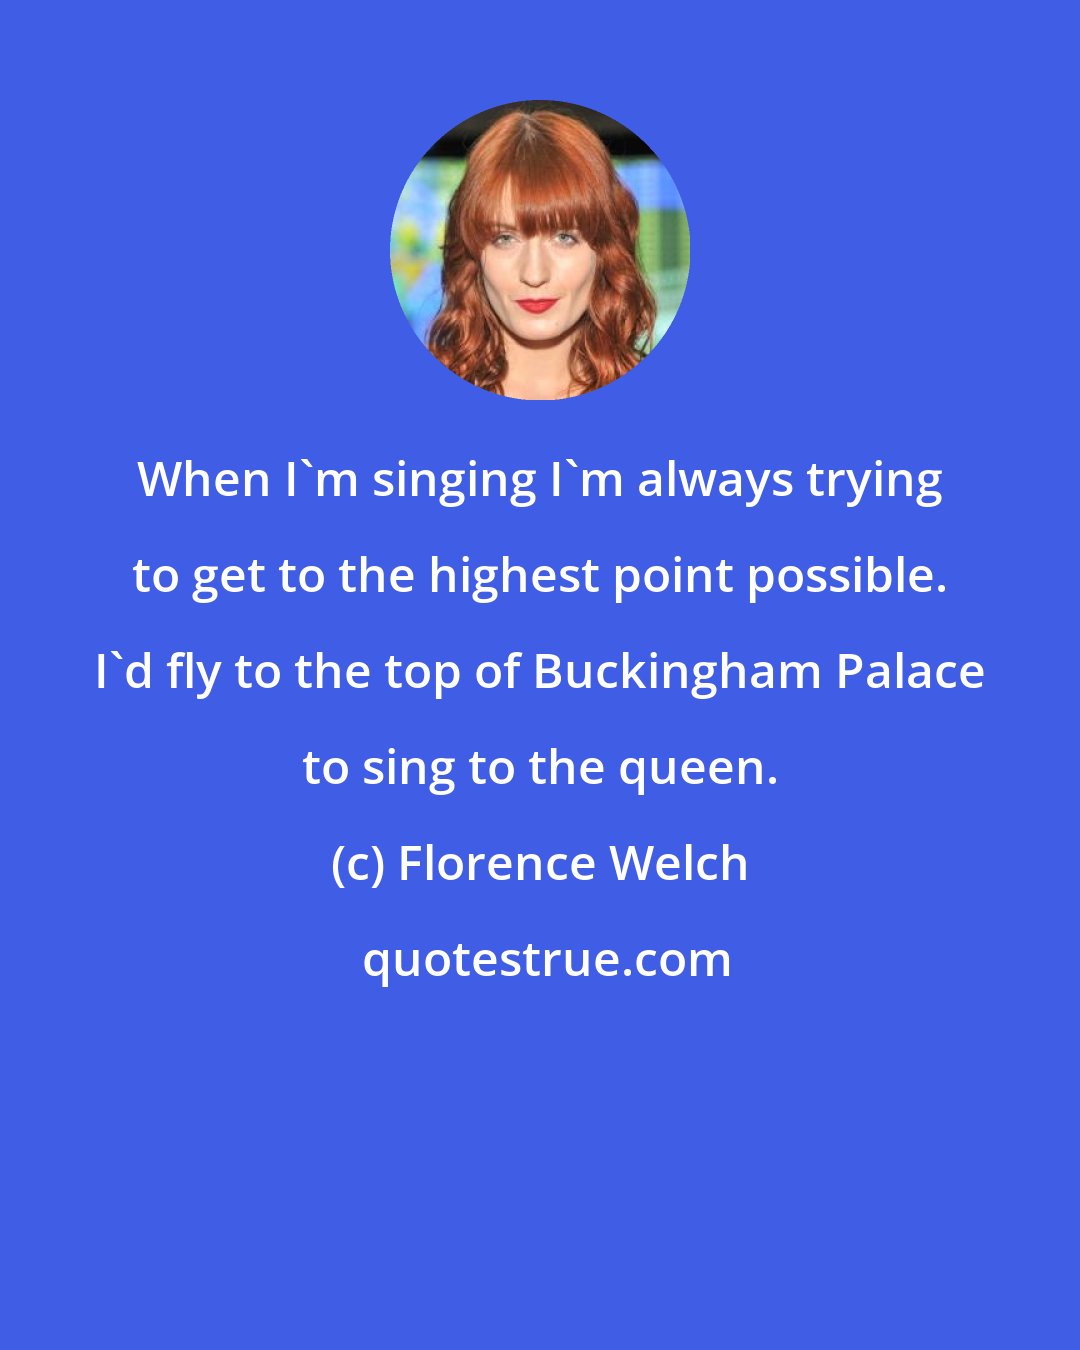 Florence Welch: When I'm singing I'm always trying to get to the highest point possible. I'd fly to the top of Buckingham Palace to sing to the queen.